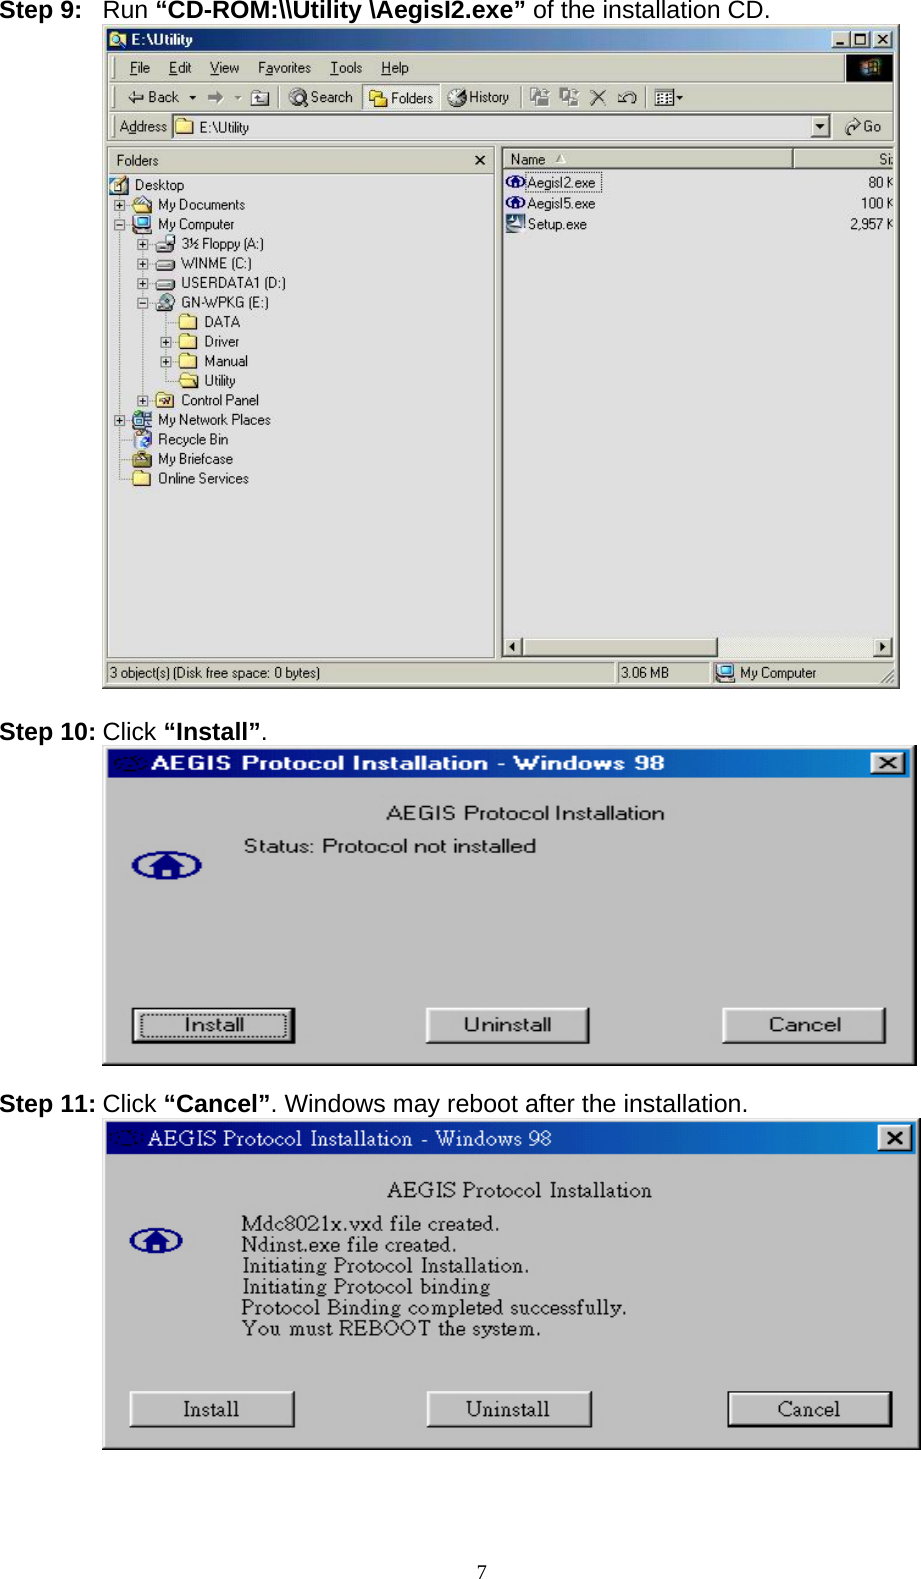 7   Step 9: Run “CD-ROM:\\Utility \AegisI2.exe” of the installation CD.   Step 10: Click “Install”.   Step 11: Click “Cancel”. Windows may reboot after the installation.   